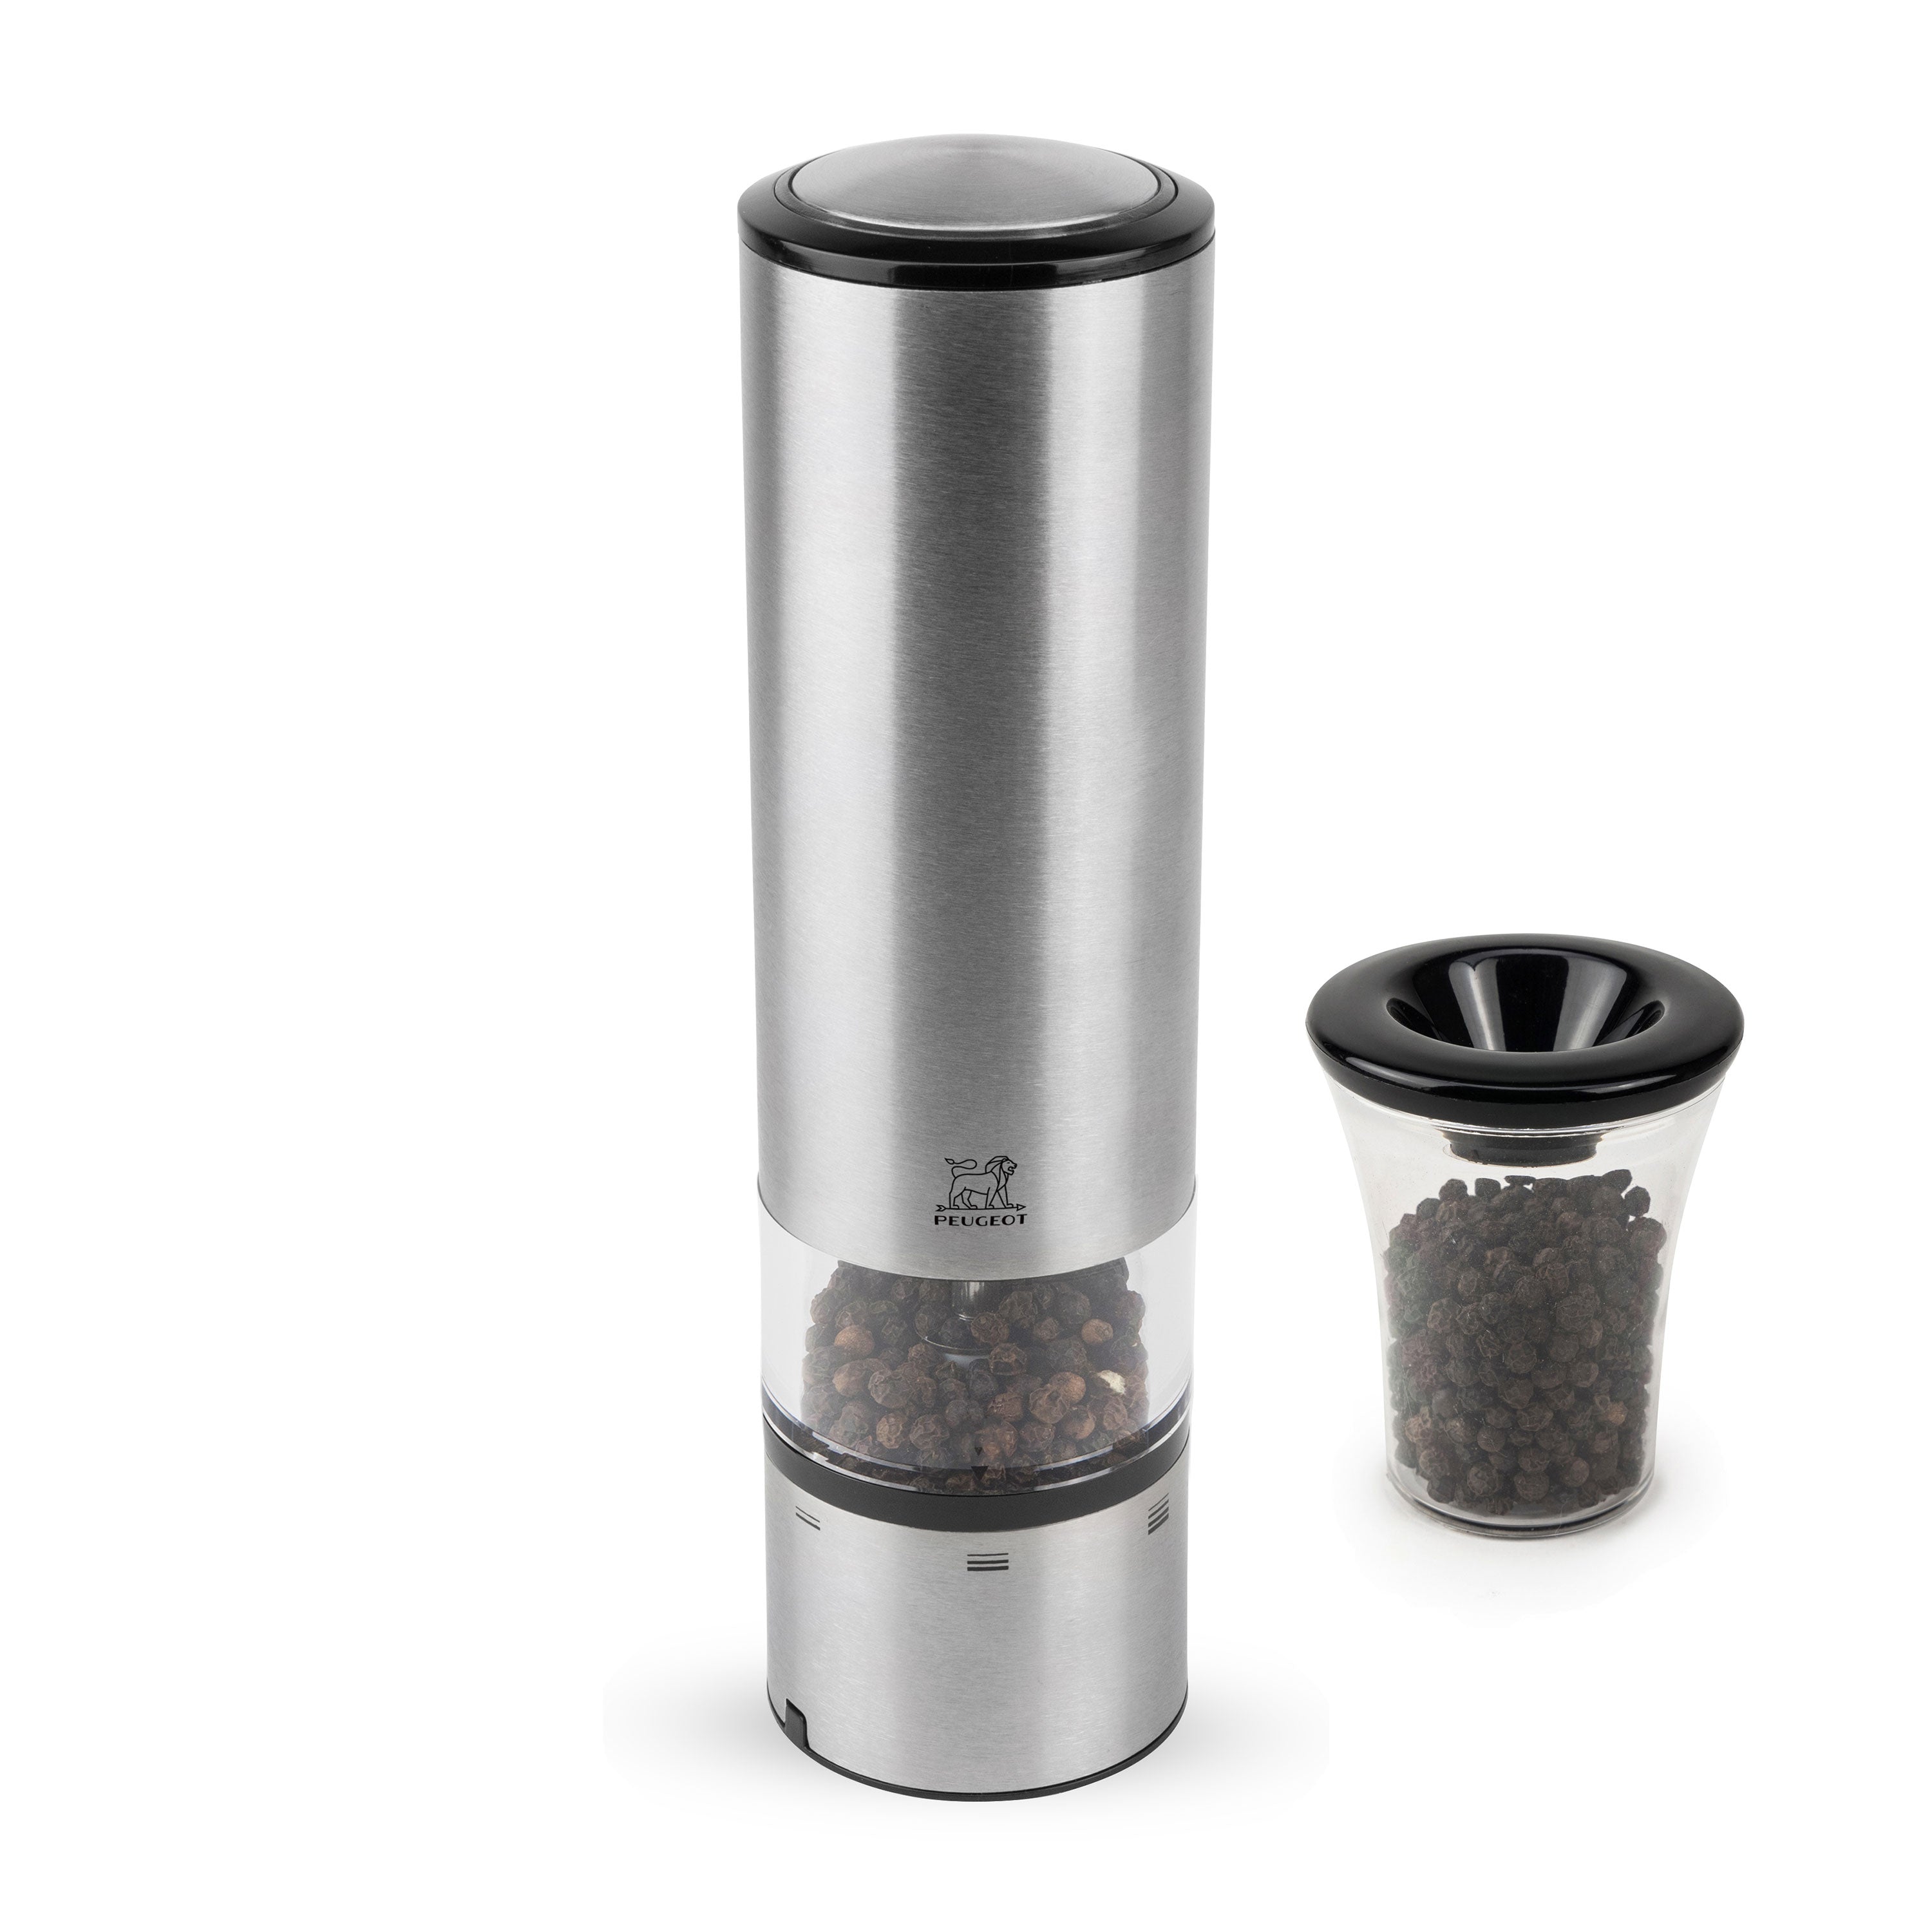 Electric Pepper Mill - Just turn it over and it will grind your pepper!